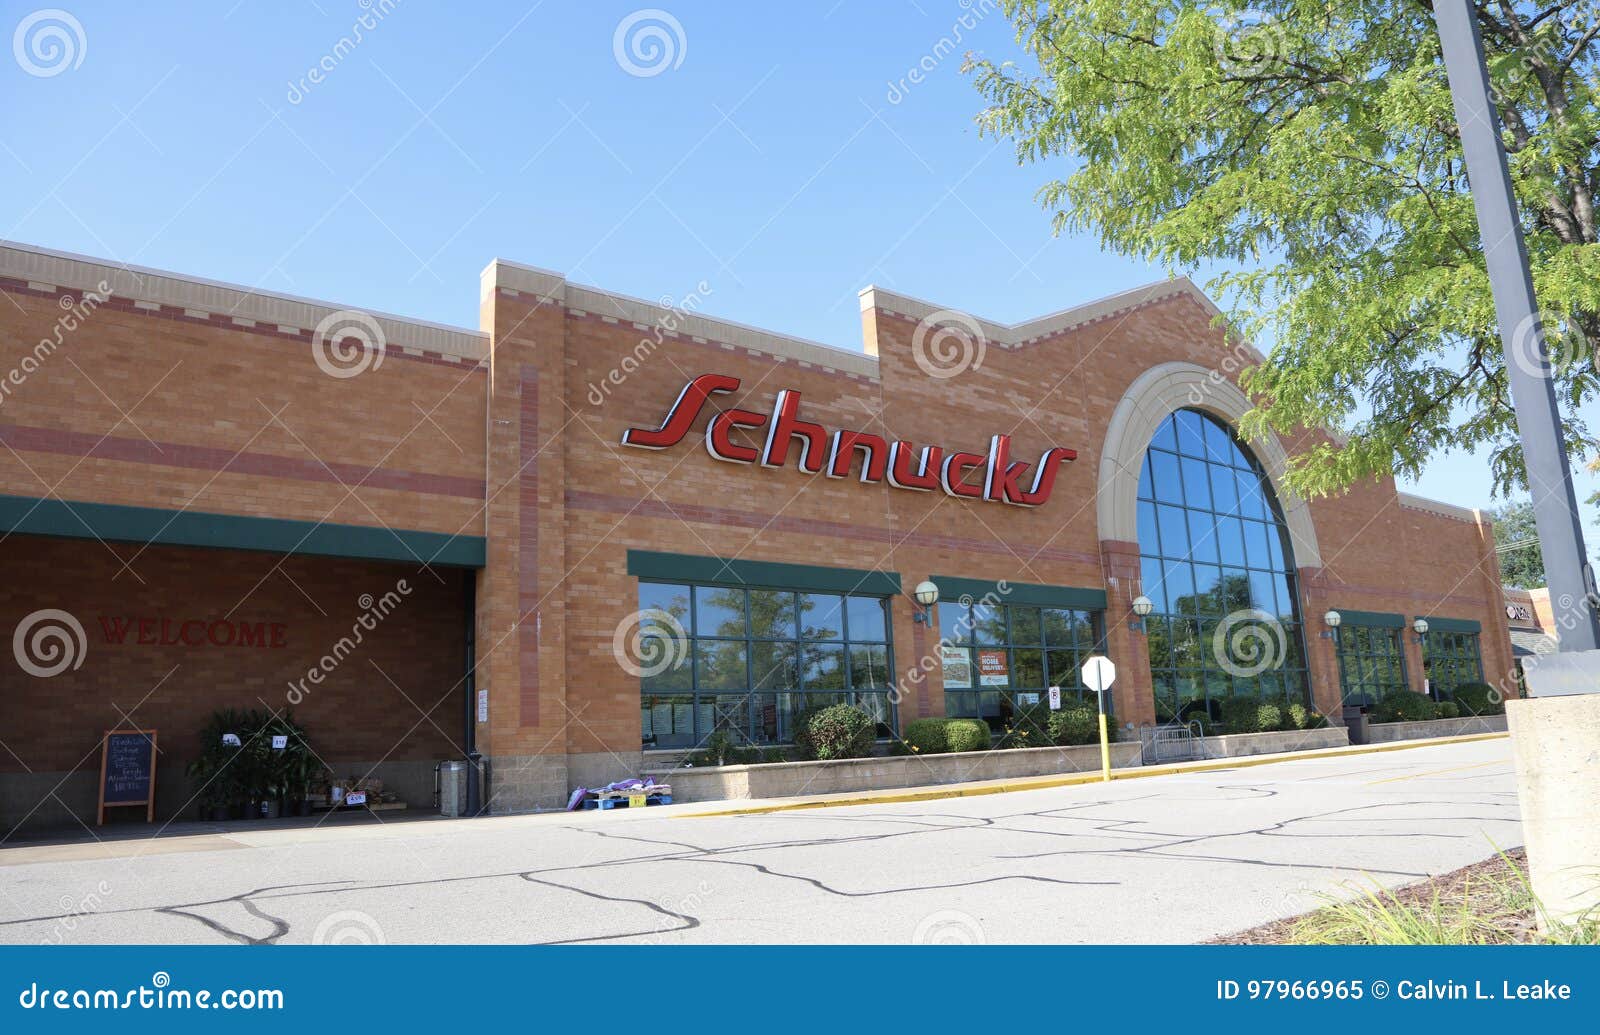 Schnucks Supermarket Chain Grocery Store Editorial Image - Image of foods, shop: 97966965